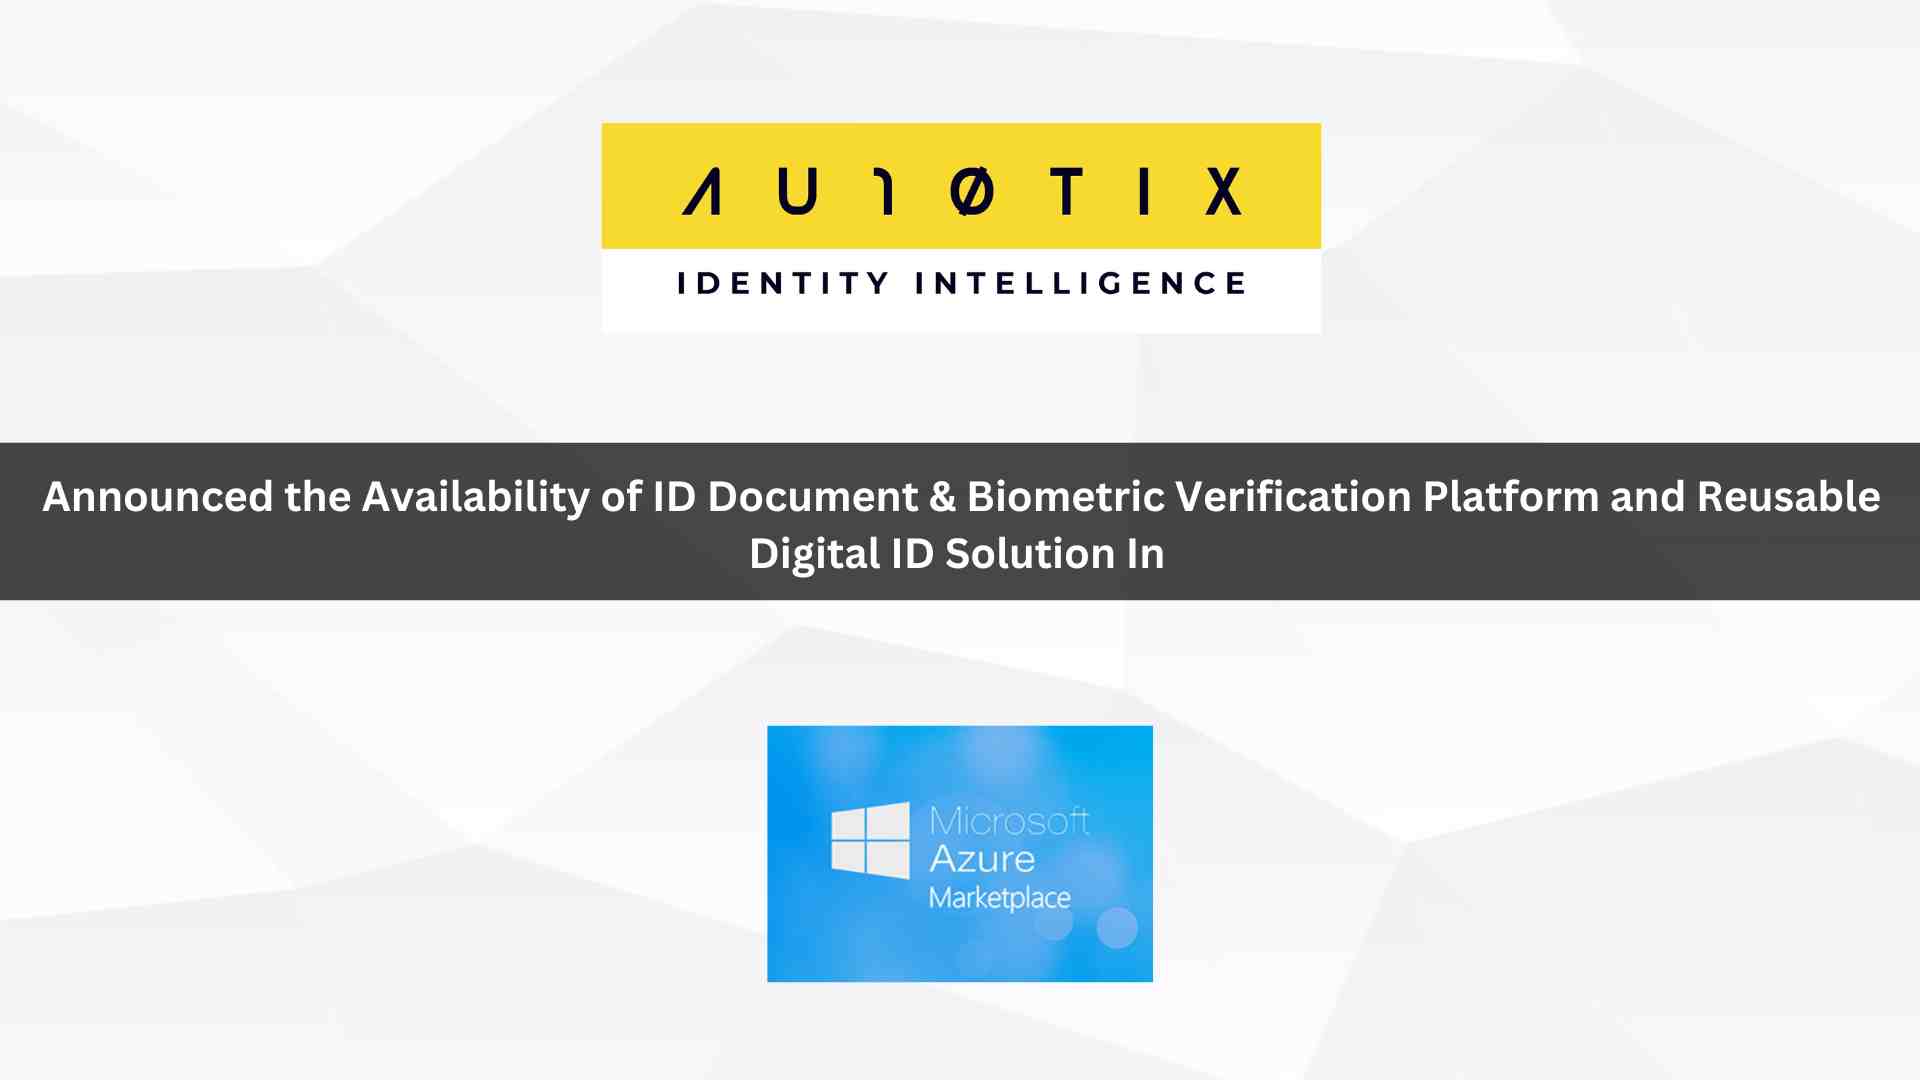 AU10TIX ID Document & Biometric Verification Platform and Reusable ID Solution Now Available in the Microsoft Azure Marketplace